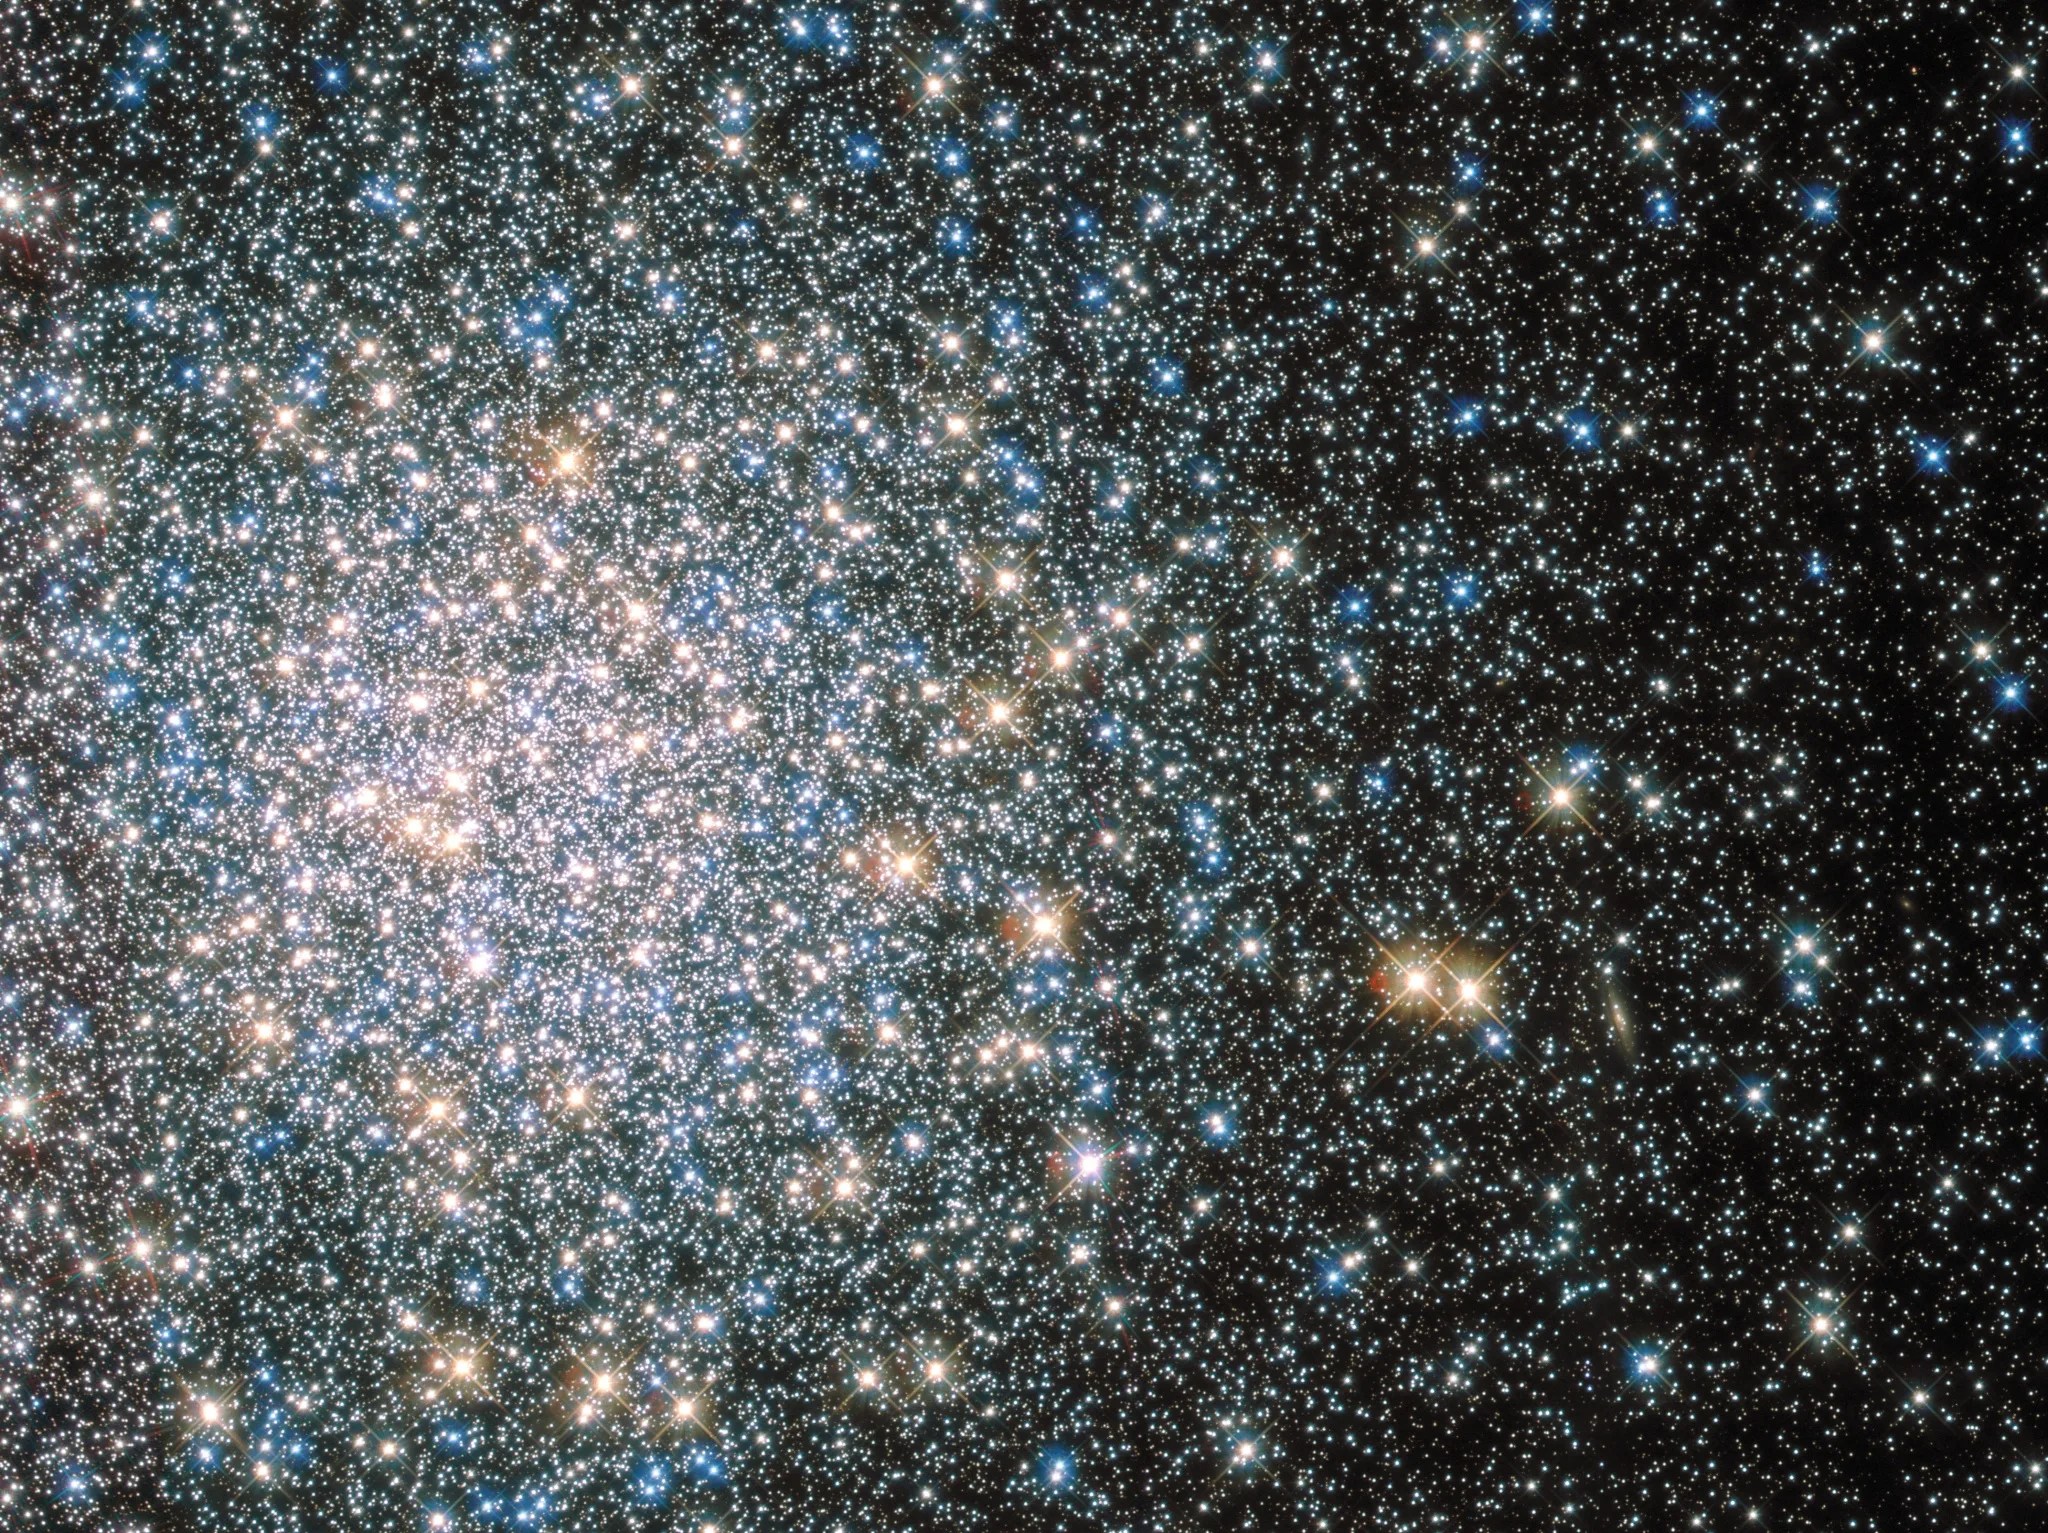 A cluster of mostly blue stars, chunks of pinkish-white and orange stars.